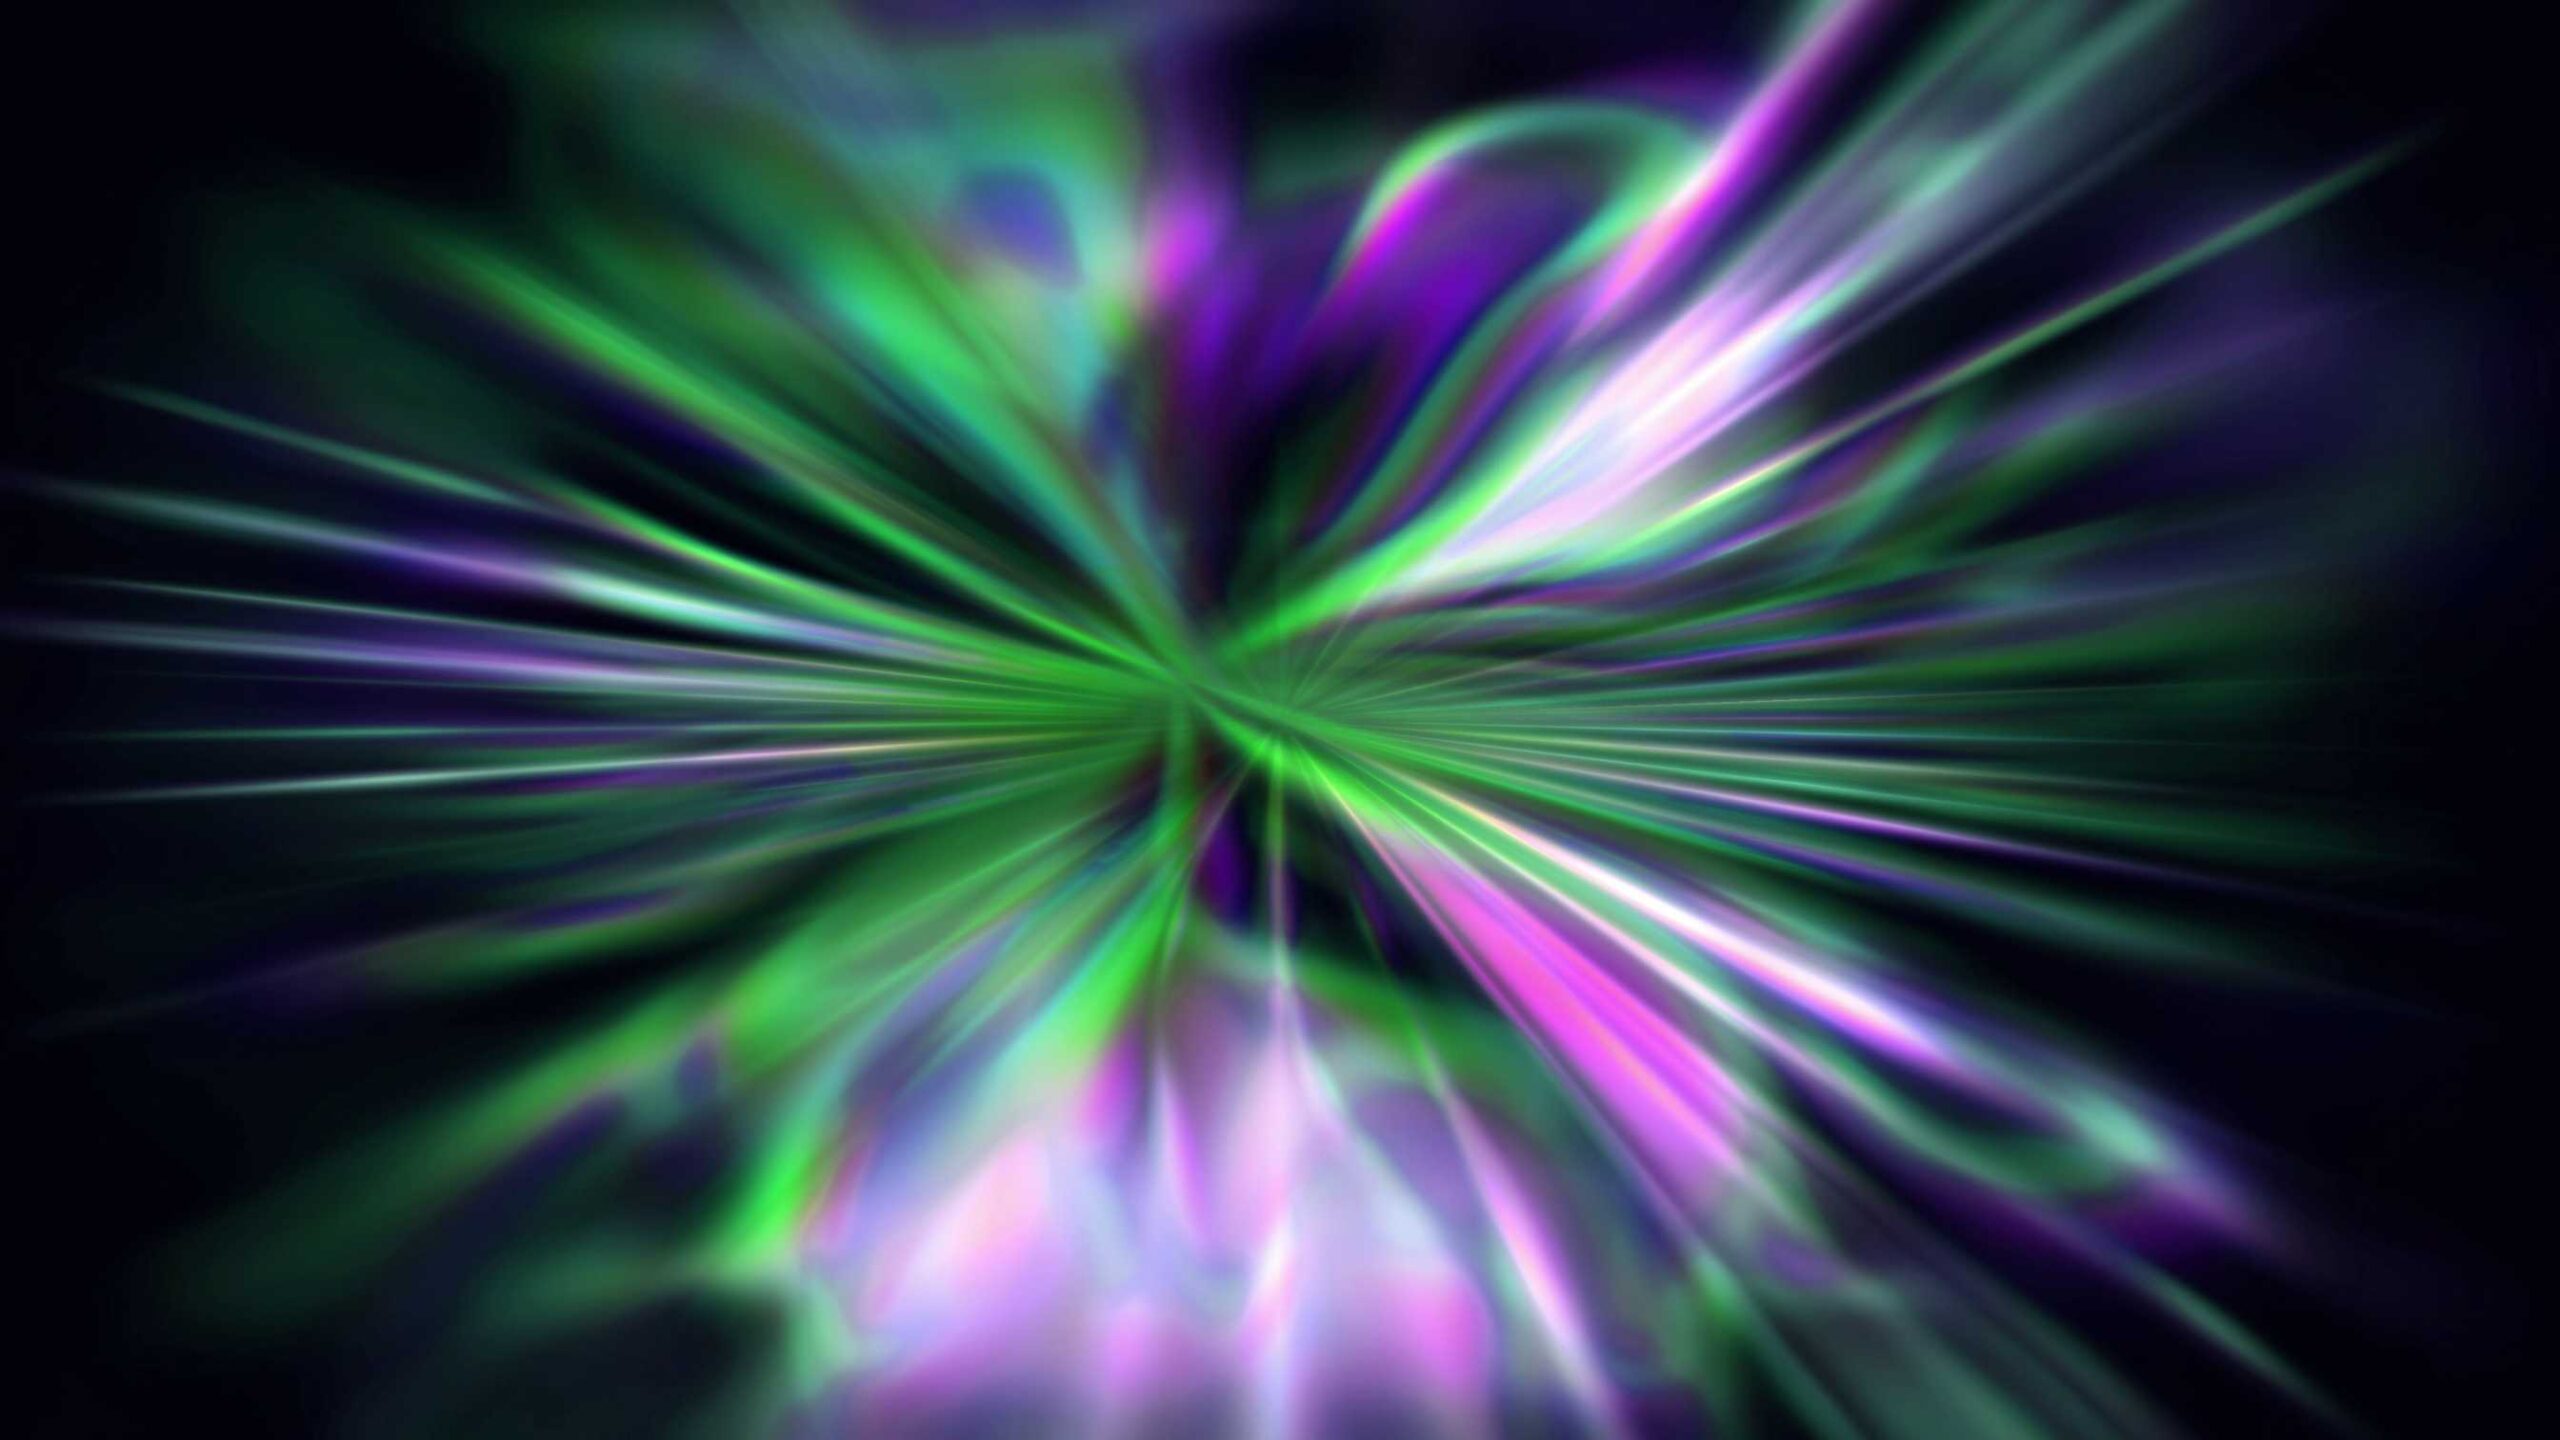 4K Green & Purple Abstract Screensaver  || No Copyright || Free Download || UHD Motion Background